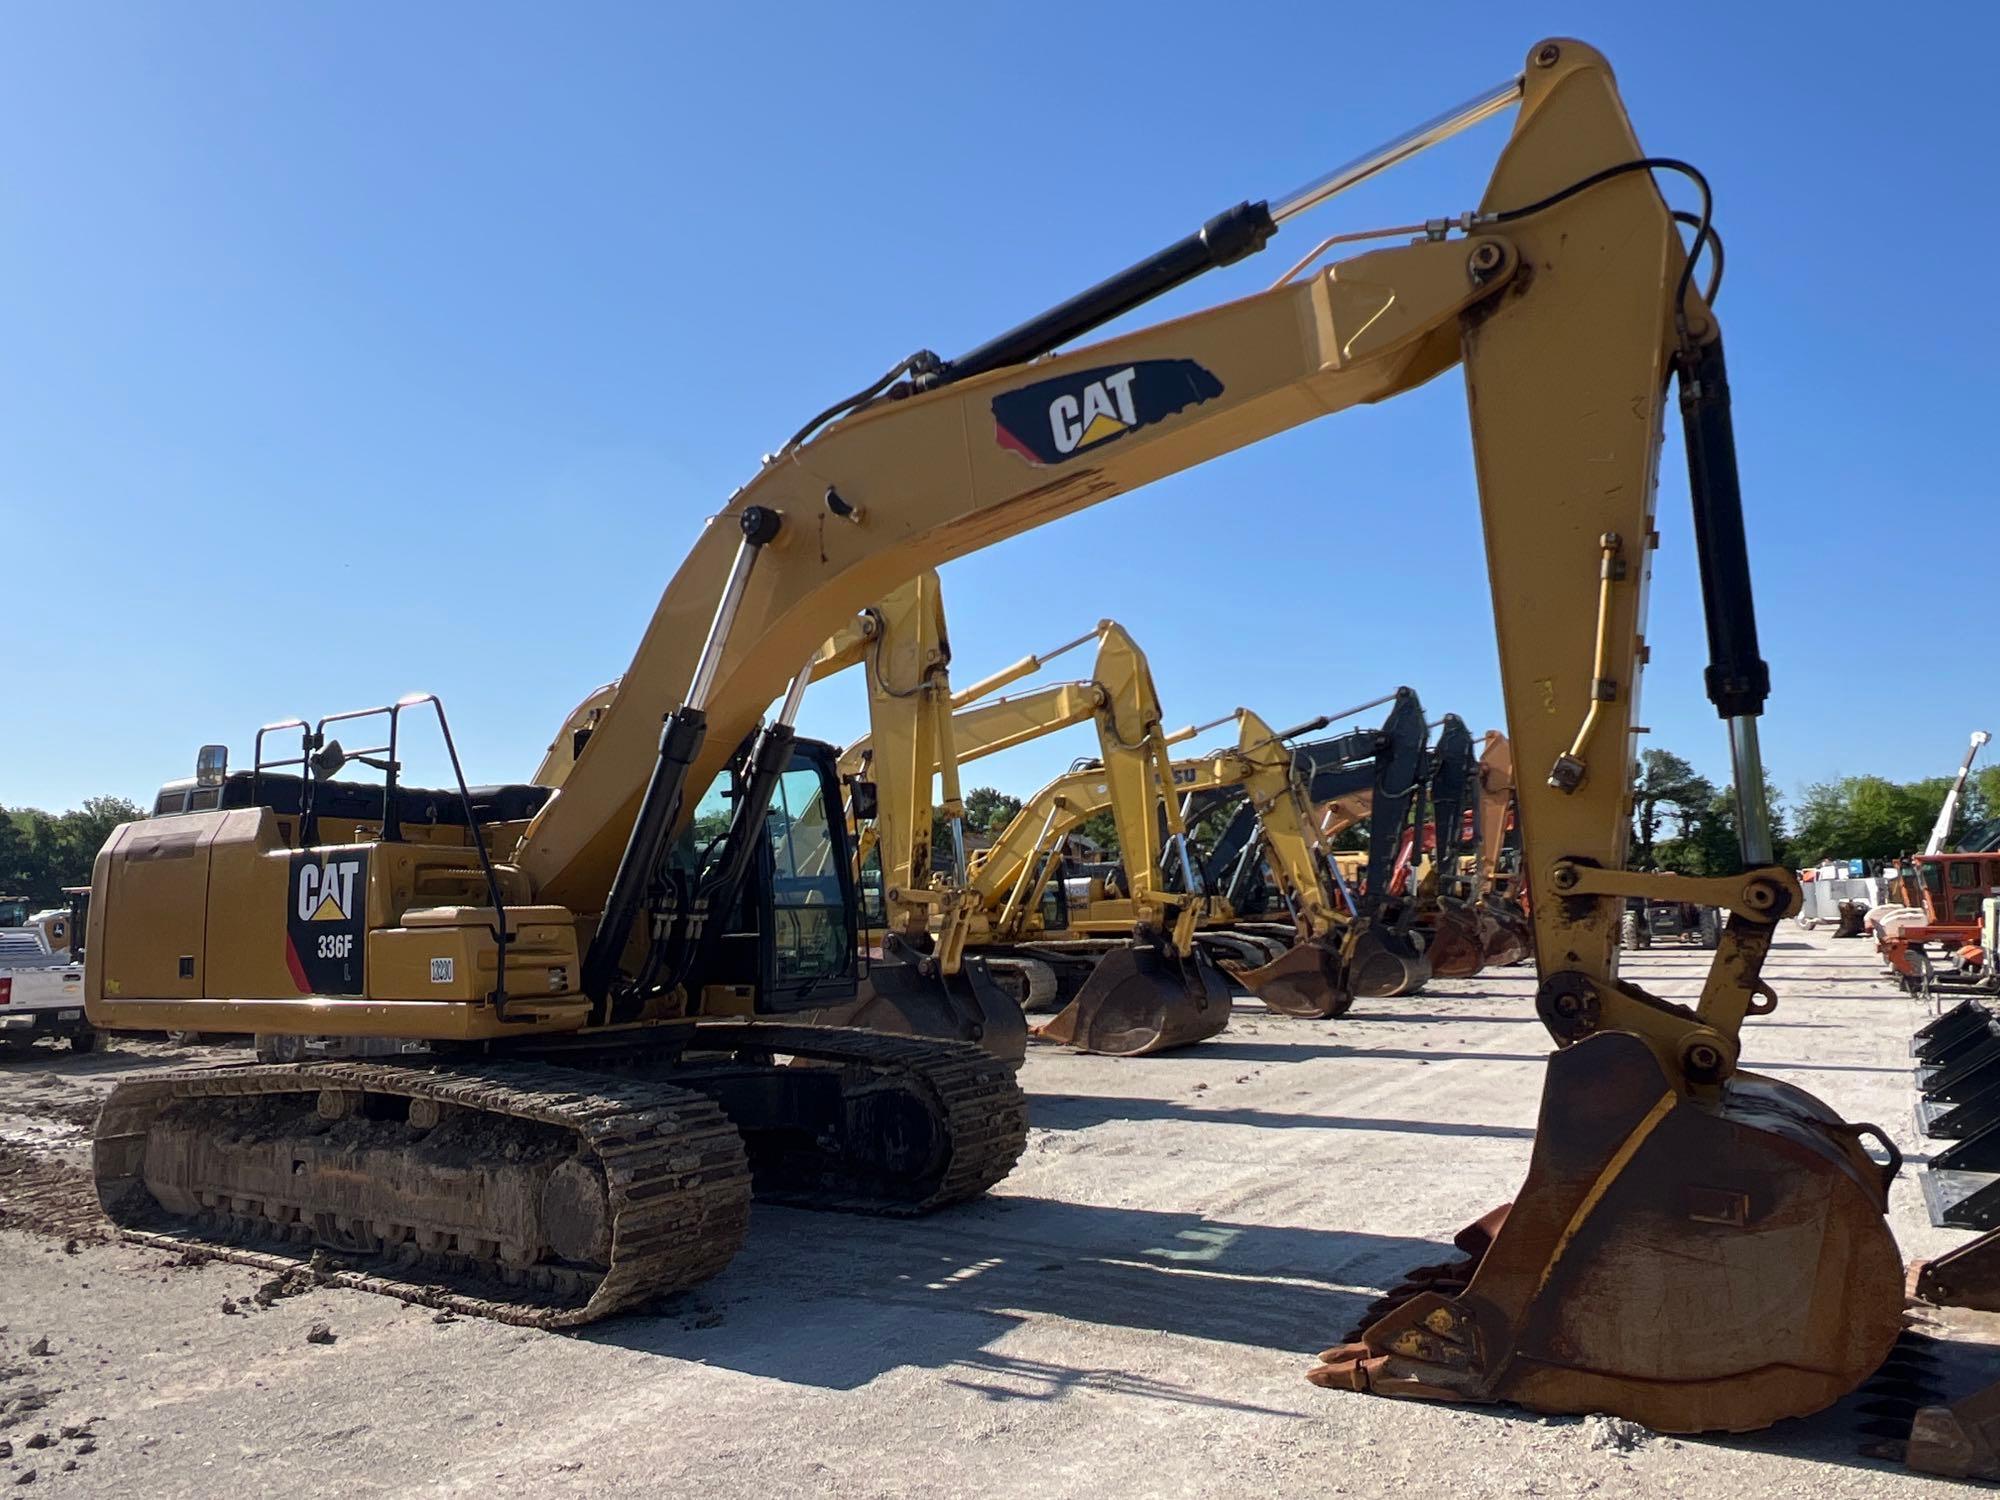 2019 CAT 336FL HYDRAULIC EXCAVATOR SN:RKB21023 powered by Cat diesel engine, equipped with Cab, air,